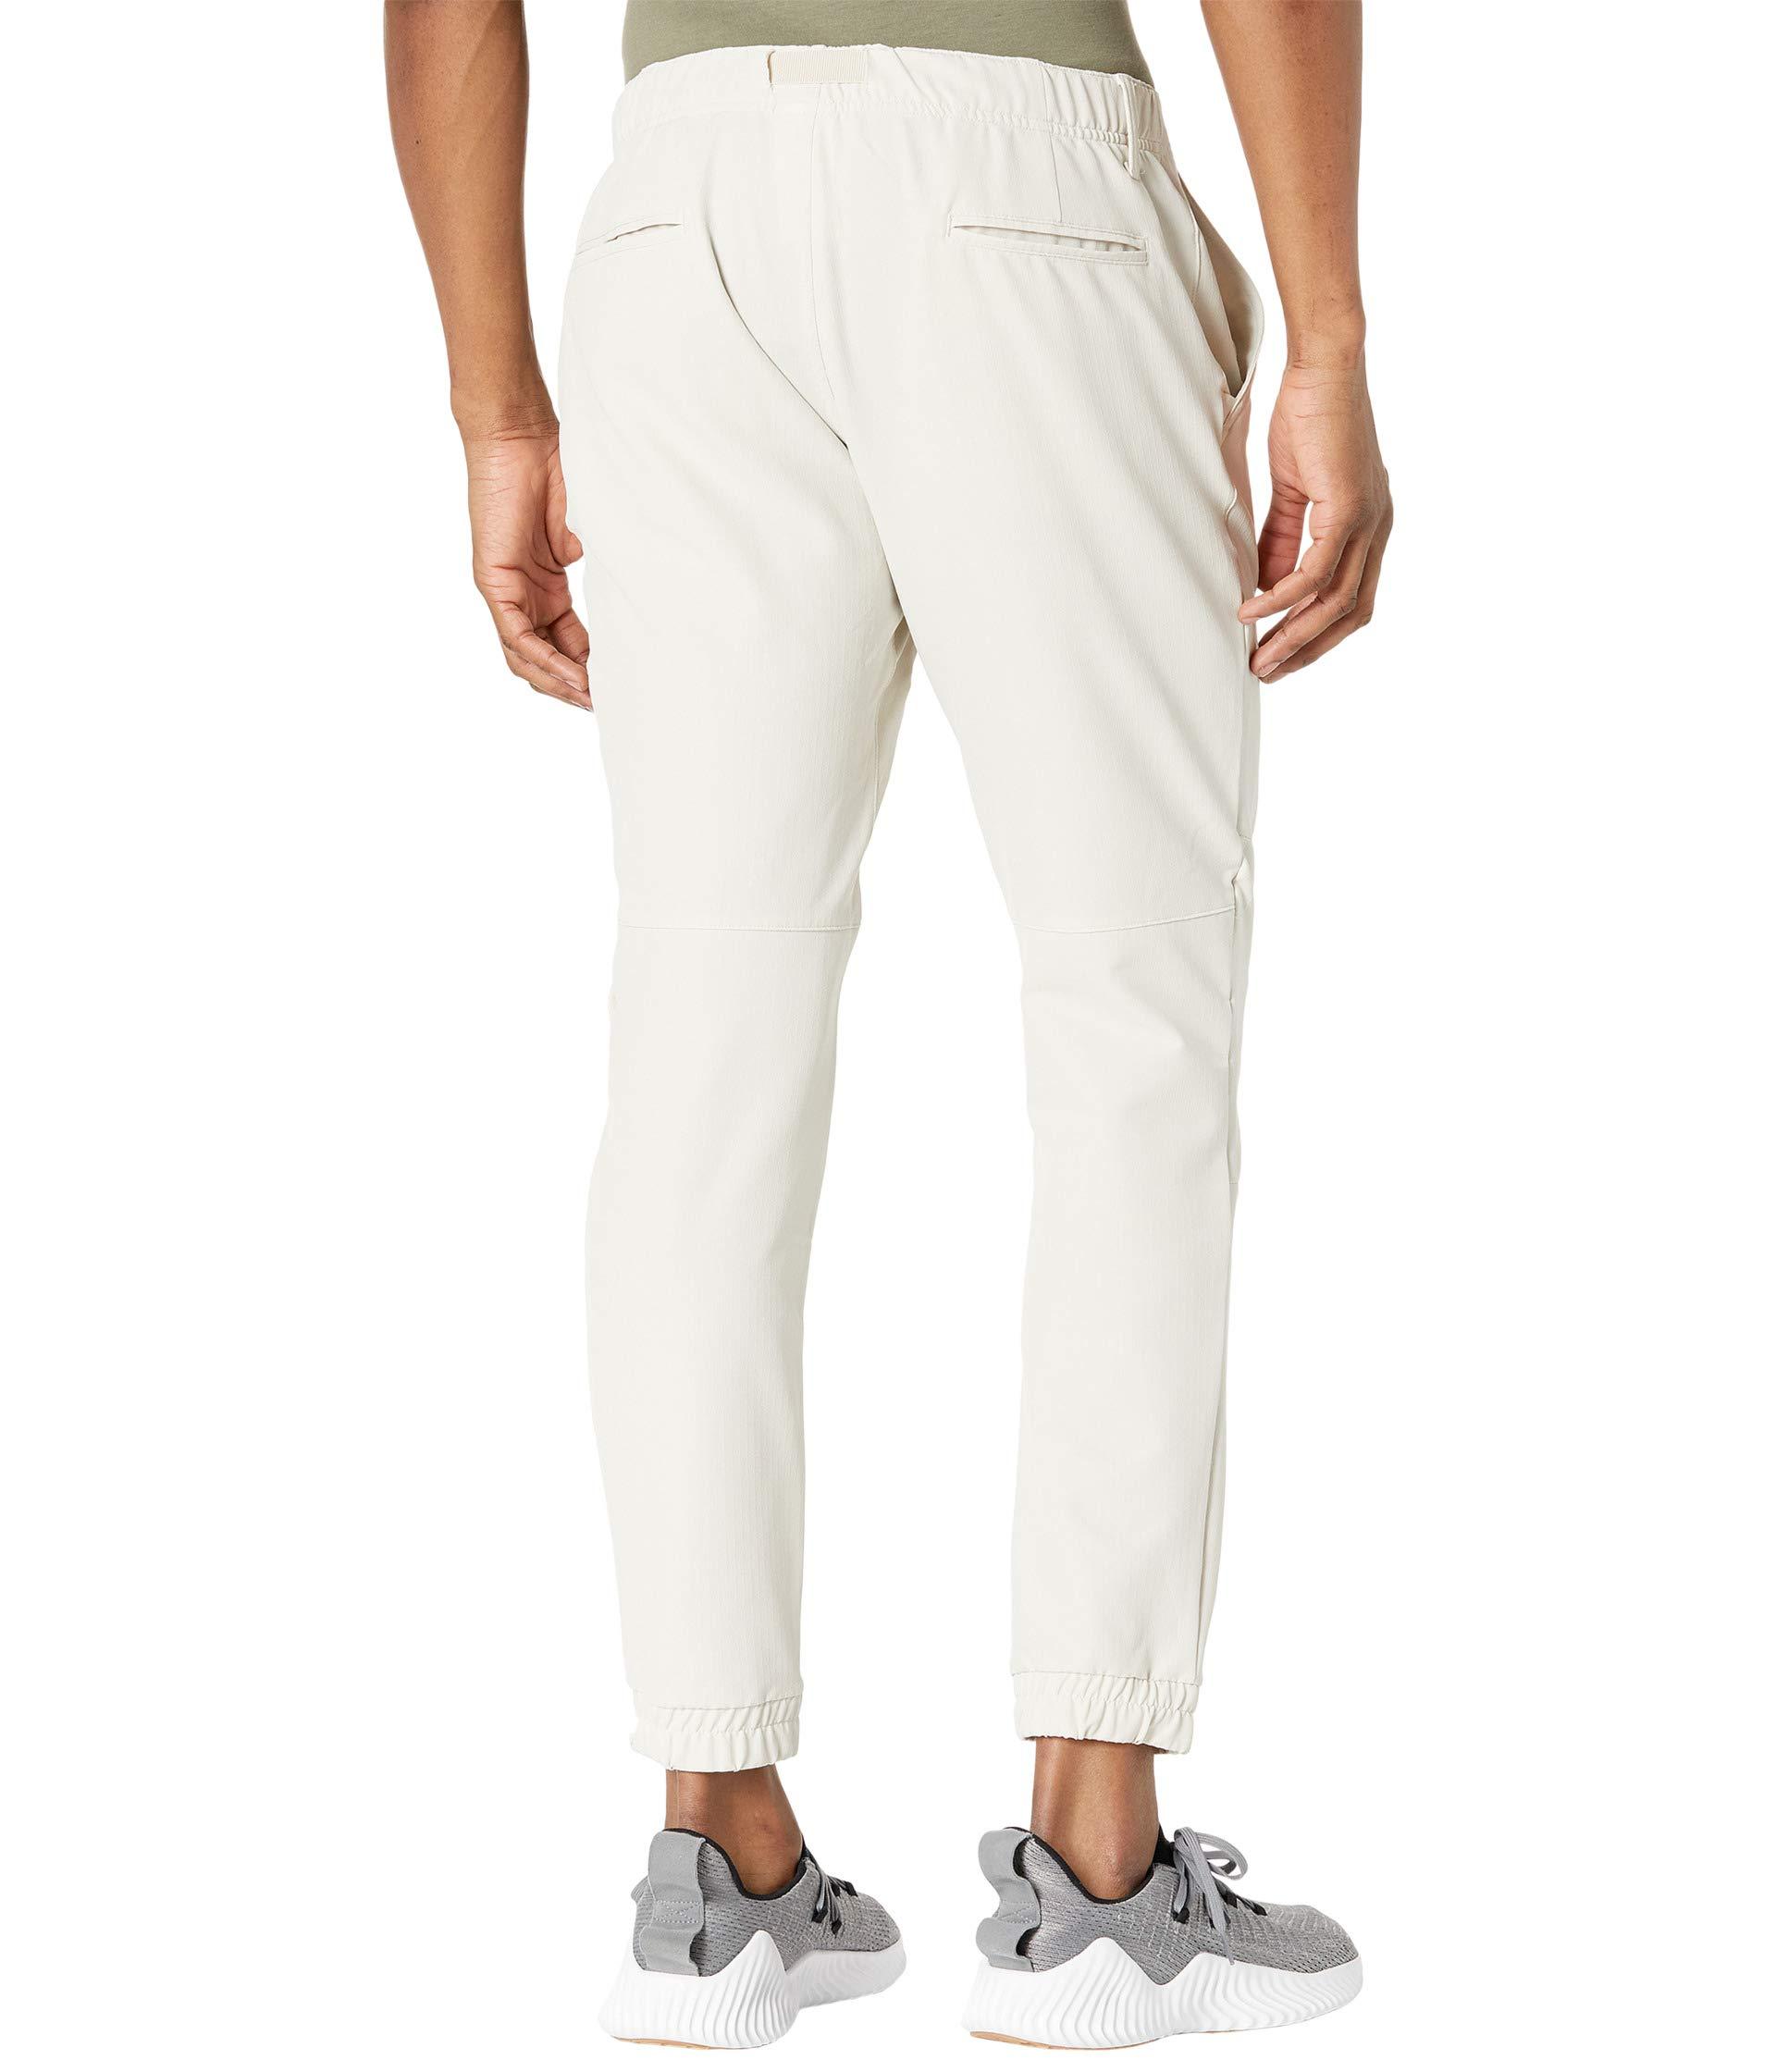 adidas Originals Synthetic Adicross Woven Jogger Pants in White for Men